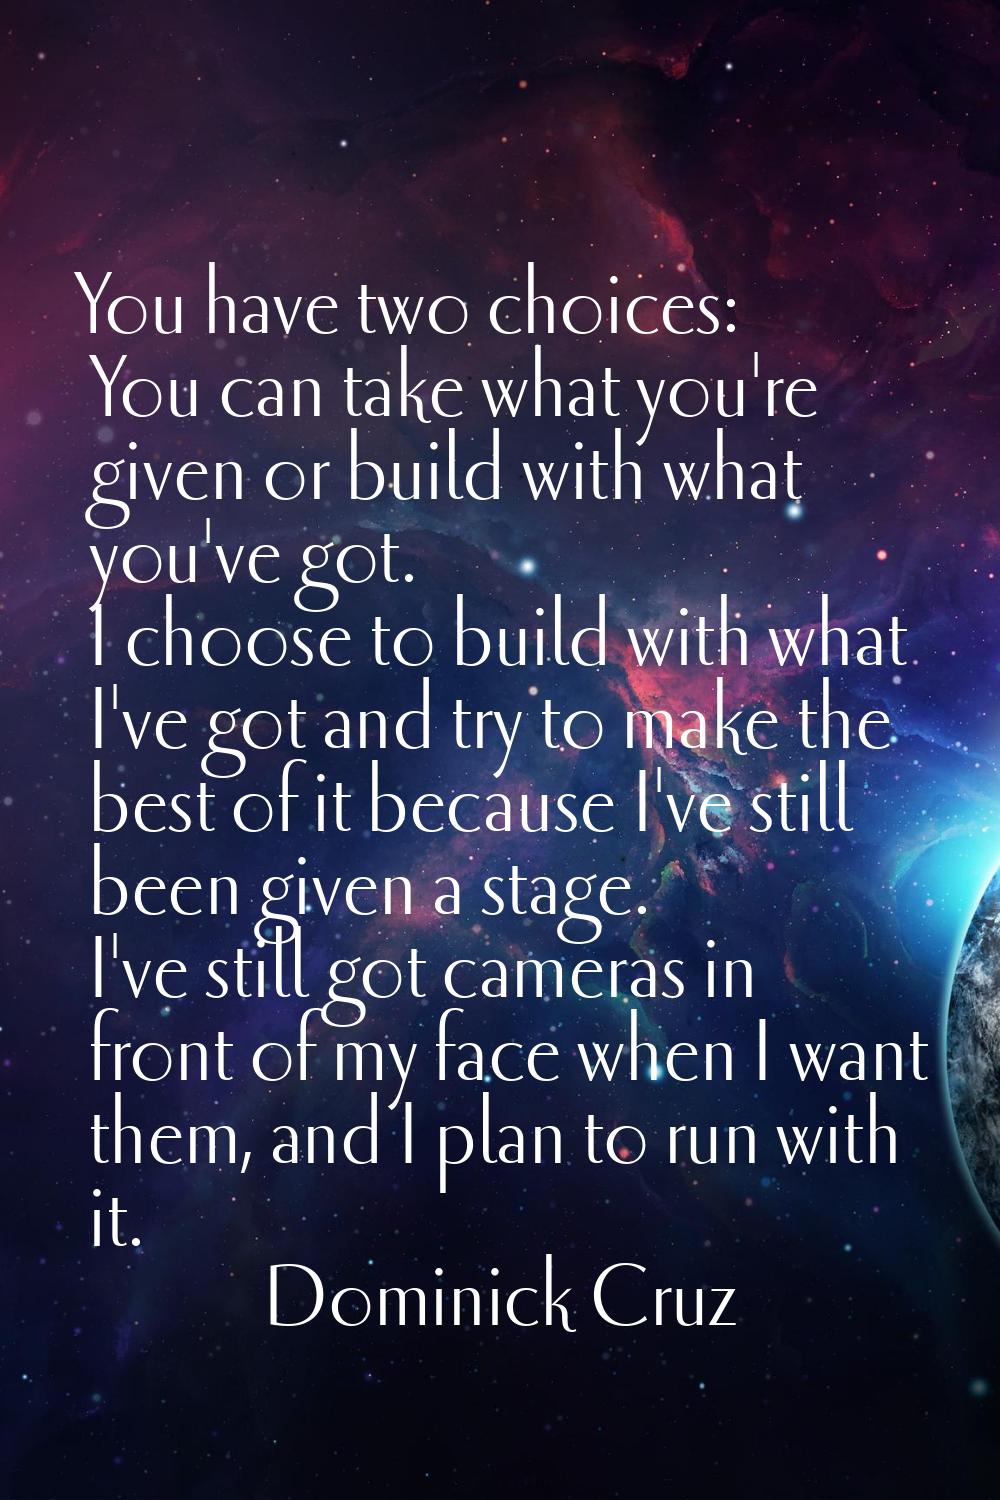 You have two choices: You can take what you're given or build with what you've got. I choose to bui